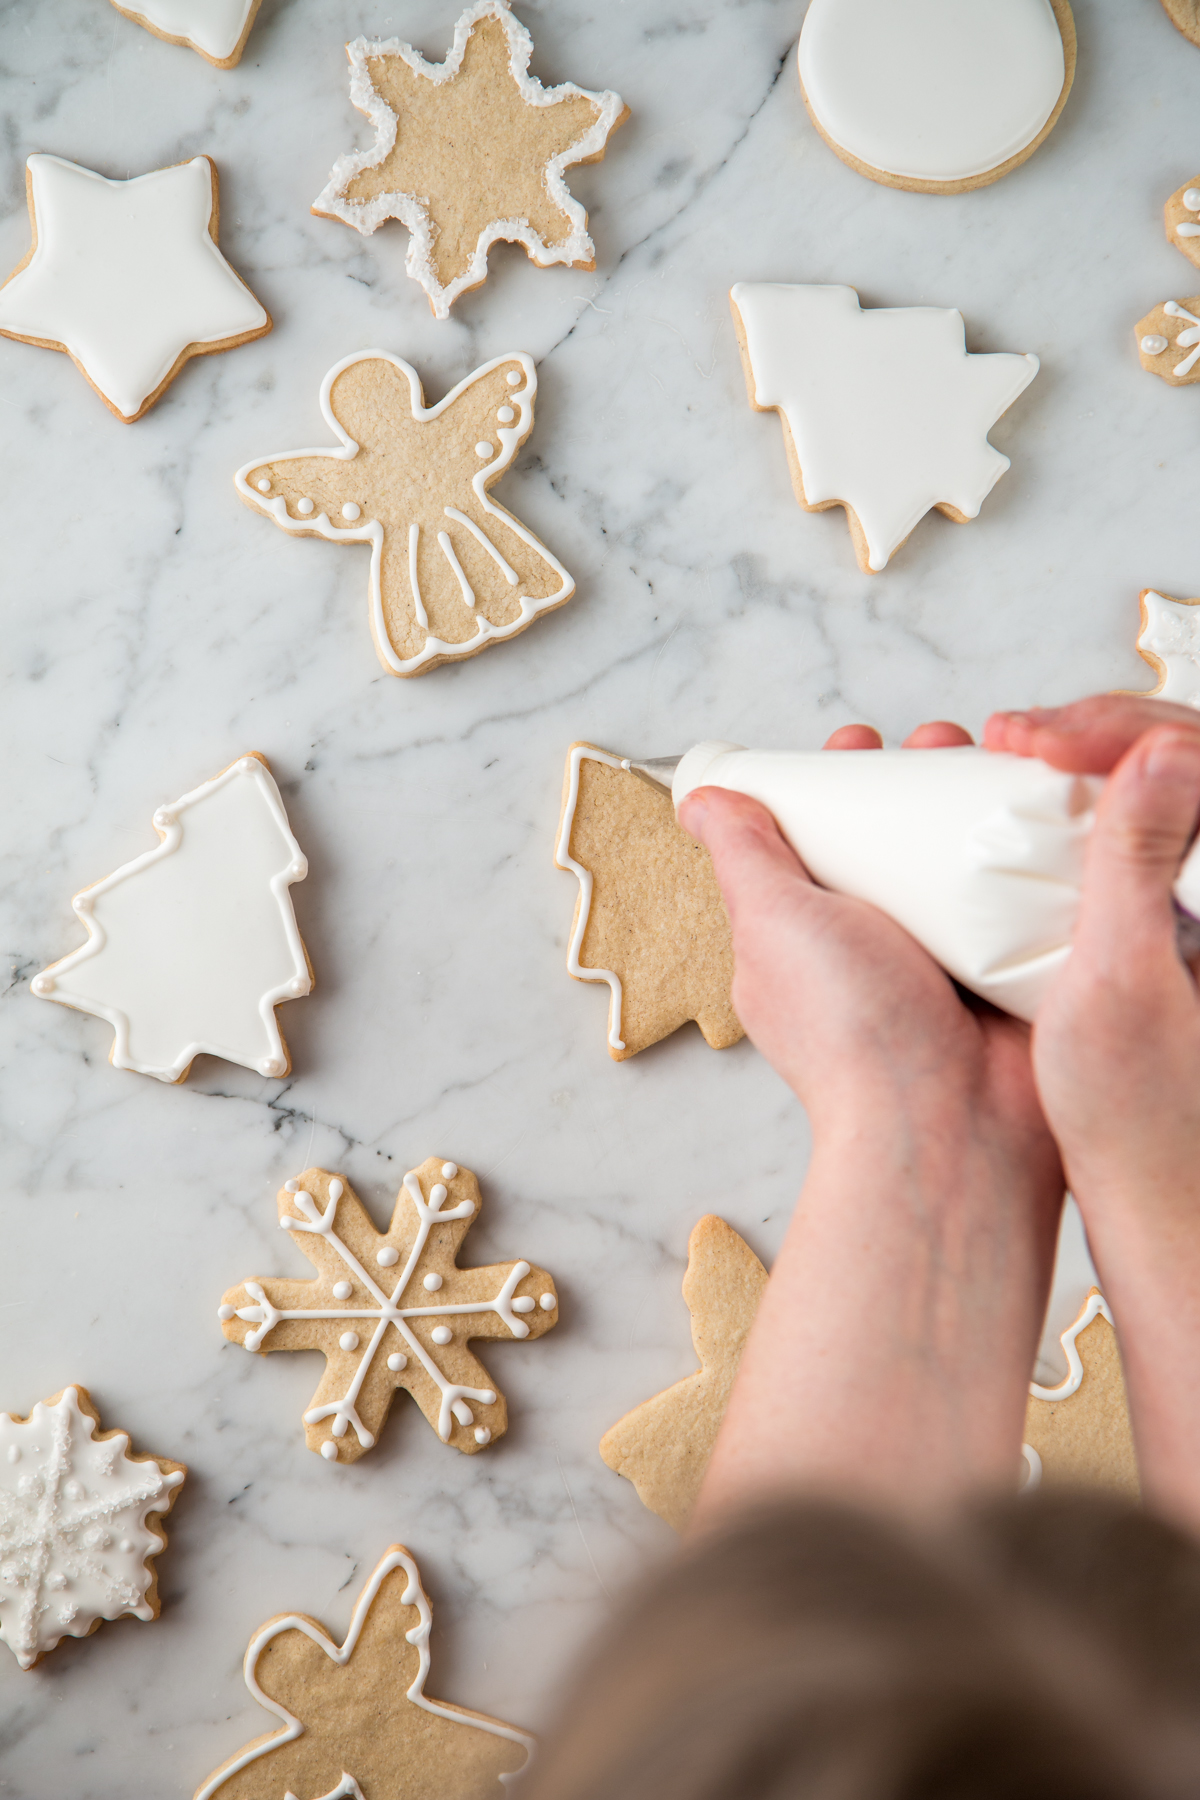 Decorating with Royal Icing - Sugar Cookie 101 - Will Cook For Friends